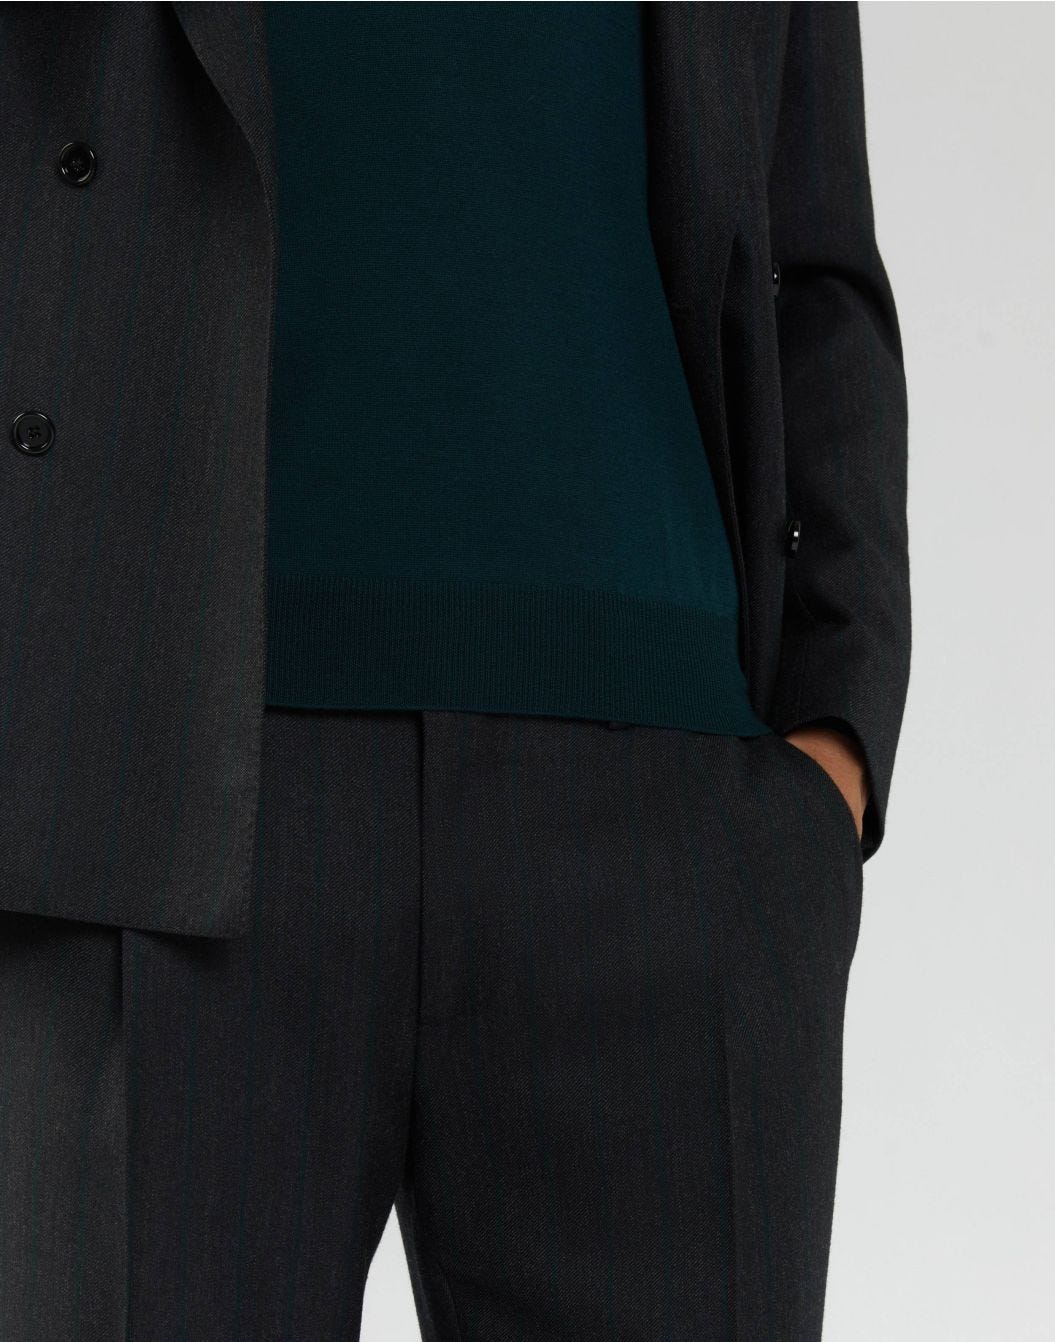 Double-breasted grey-and-green pinstripe suit - Supersoft